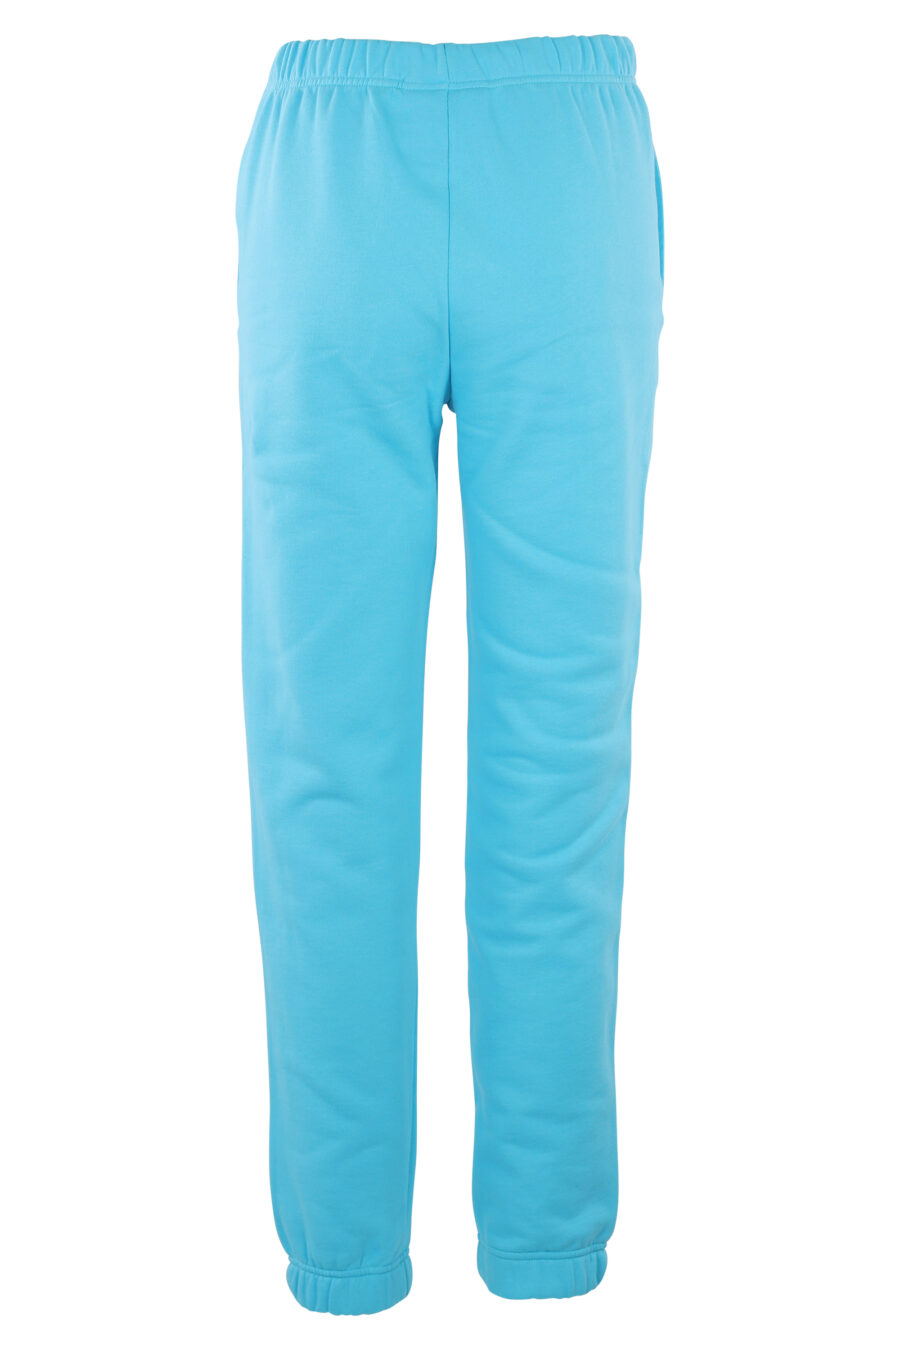 Tracksuit bottoms sky blue with eye and star logo - IMG 6331